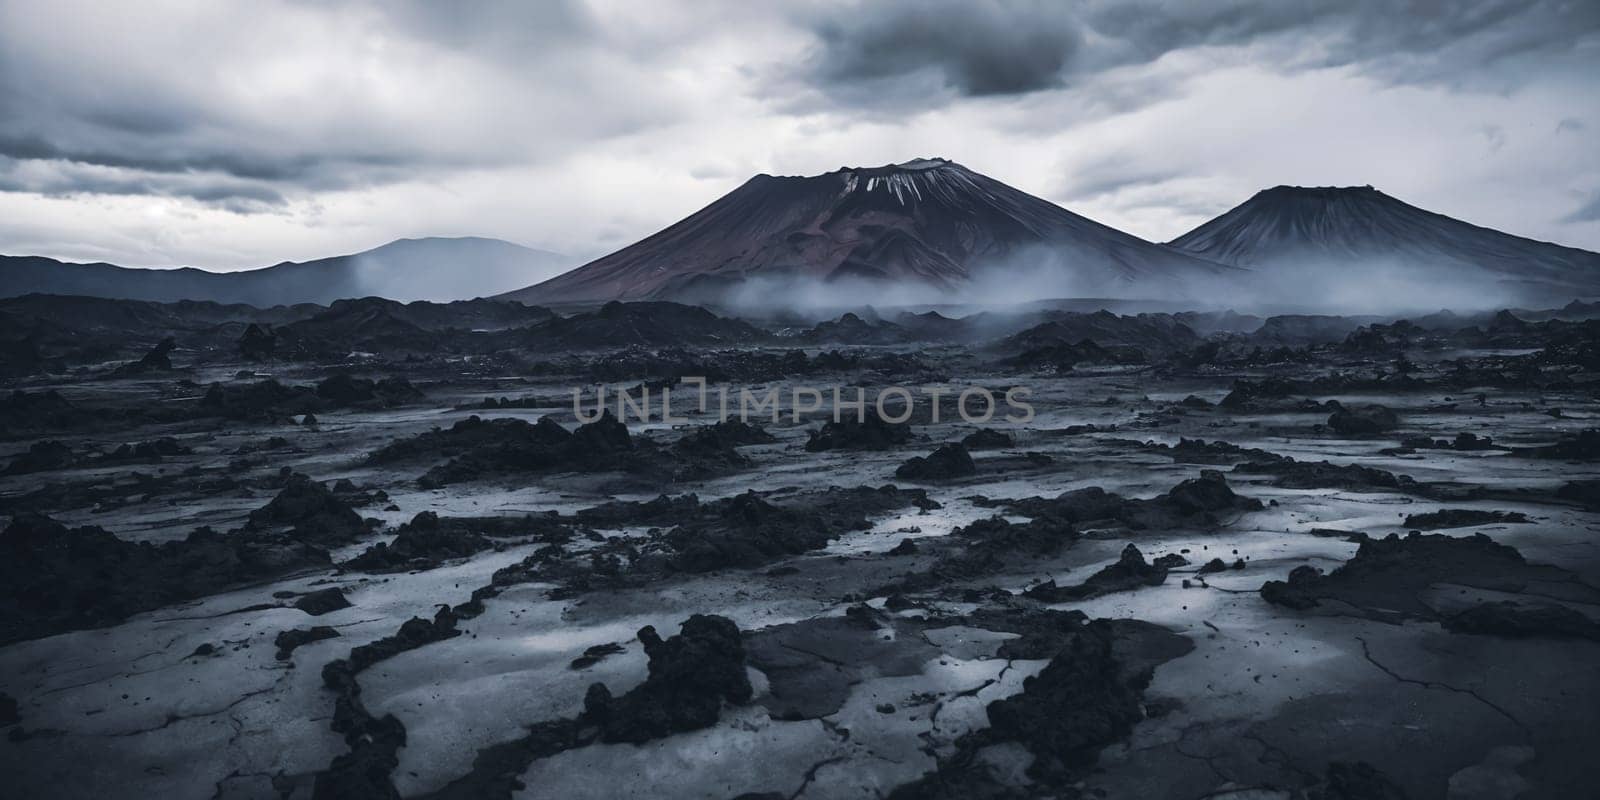 The aftermath of a volcanic eruption with layers of ash covering the surrounding landscape by GoodOlga